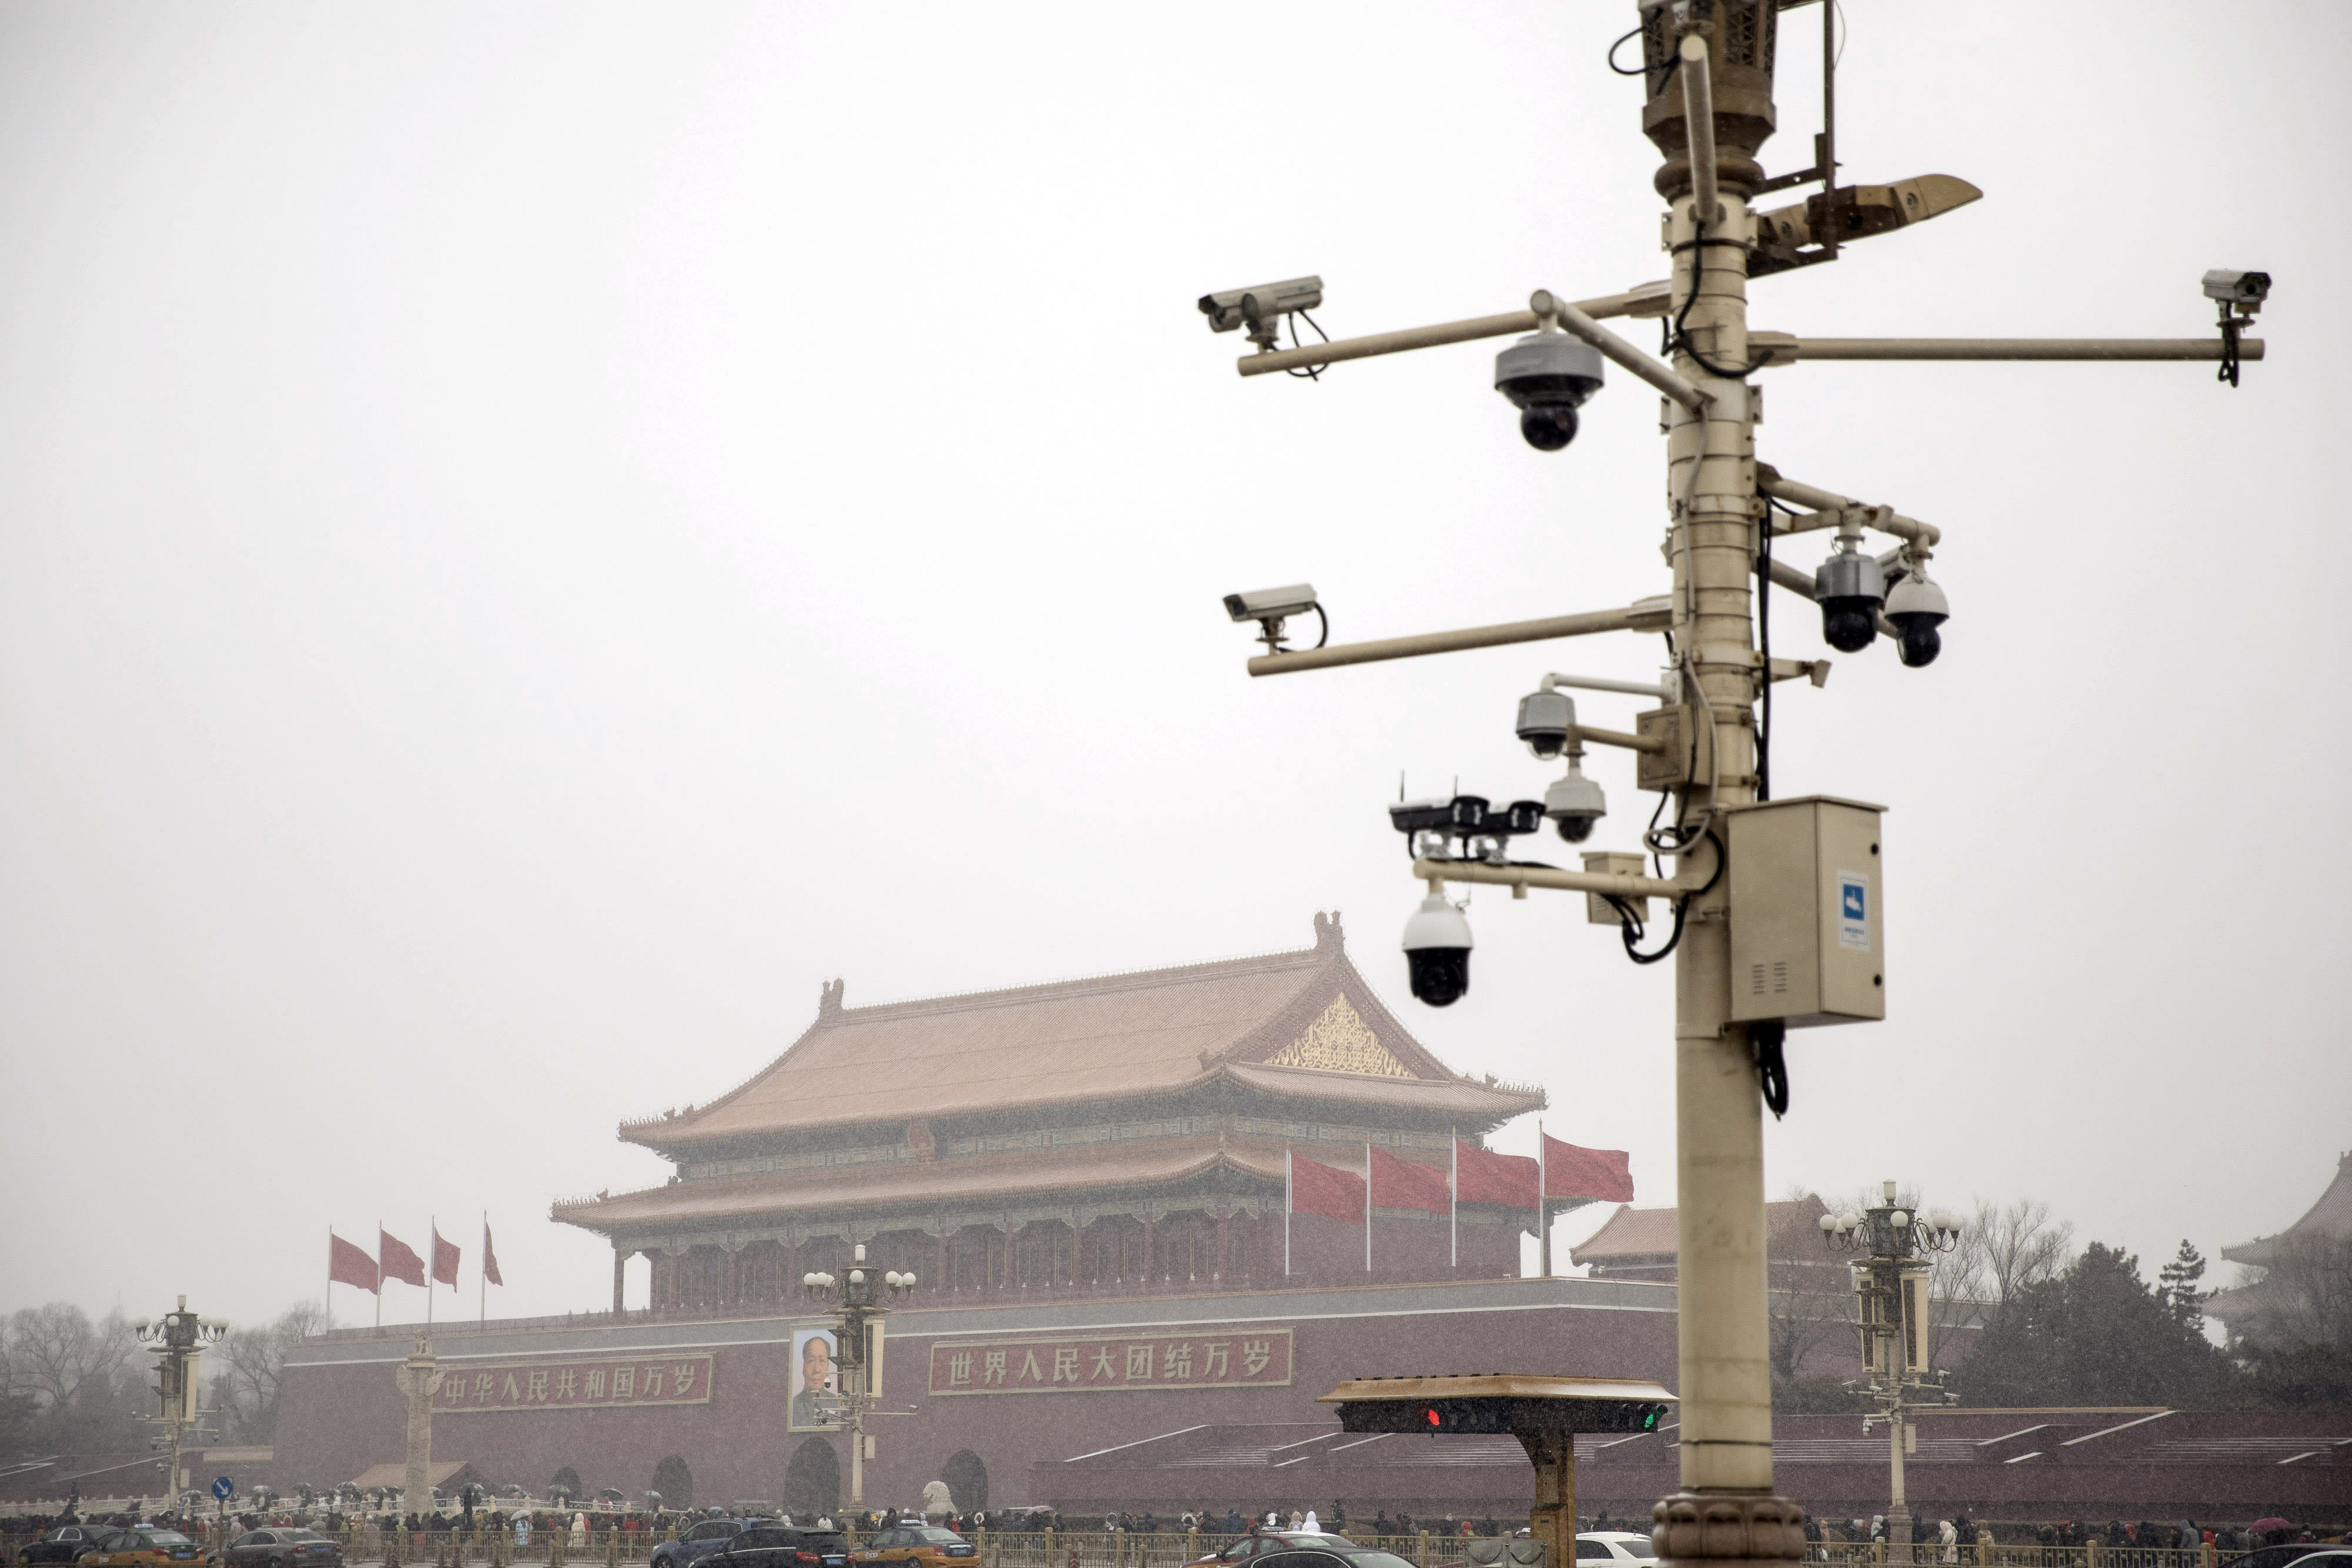 China's surveillance tech is spreading globally, raising concerns about Beijing's influence